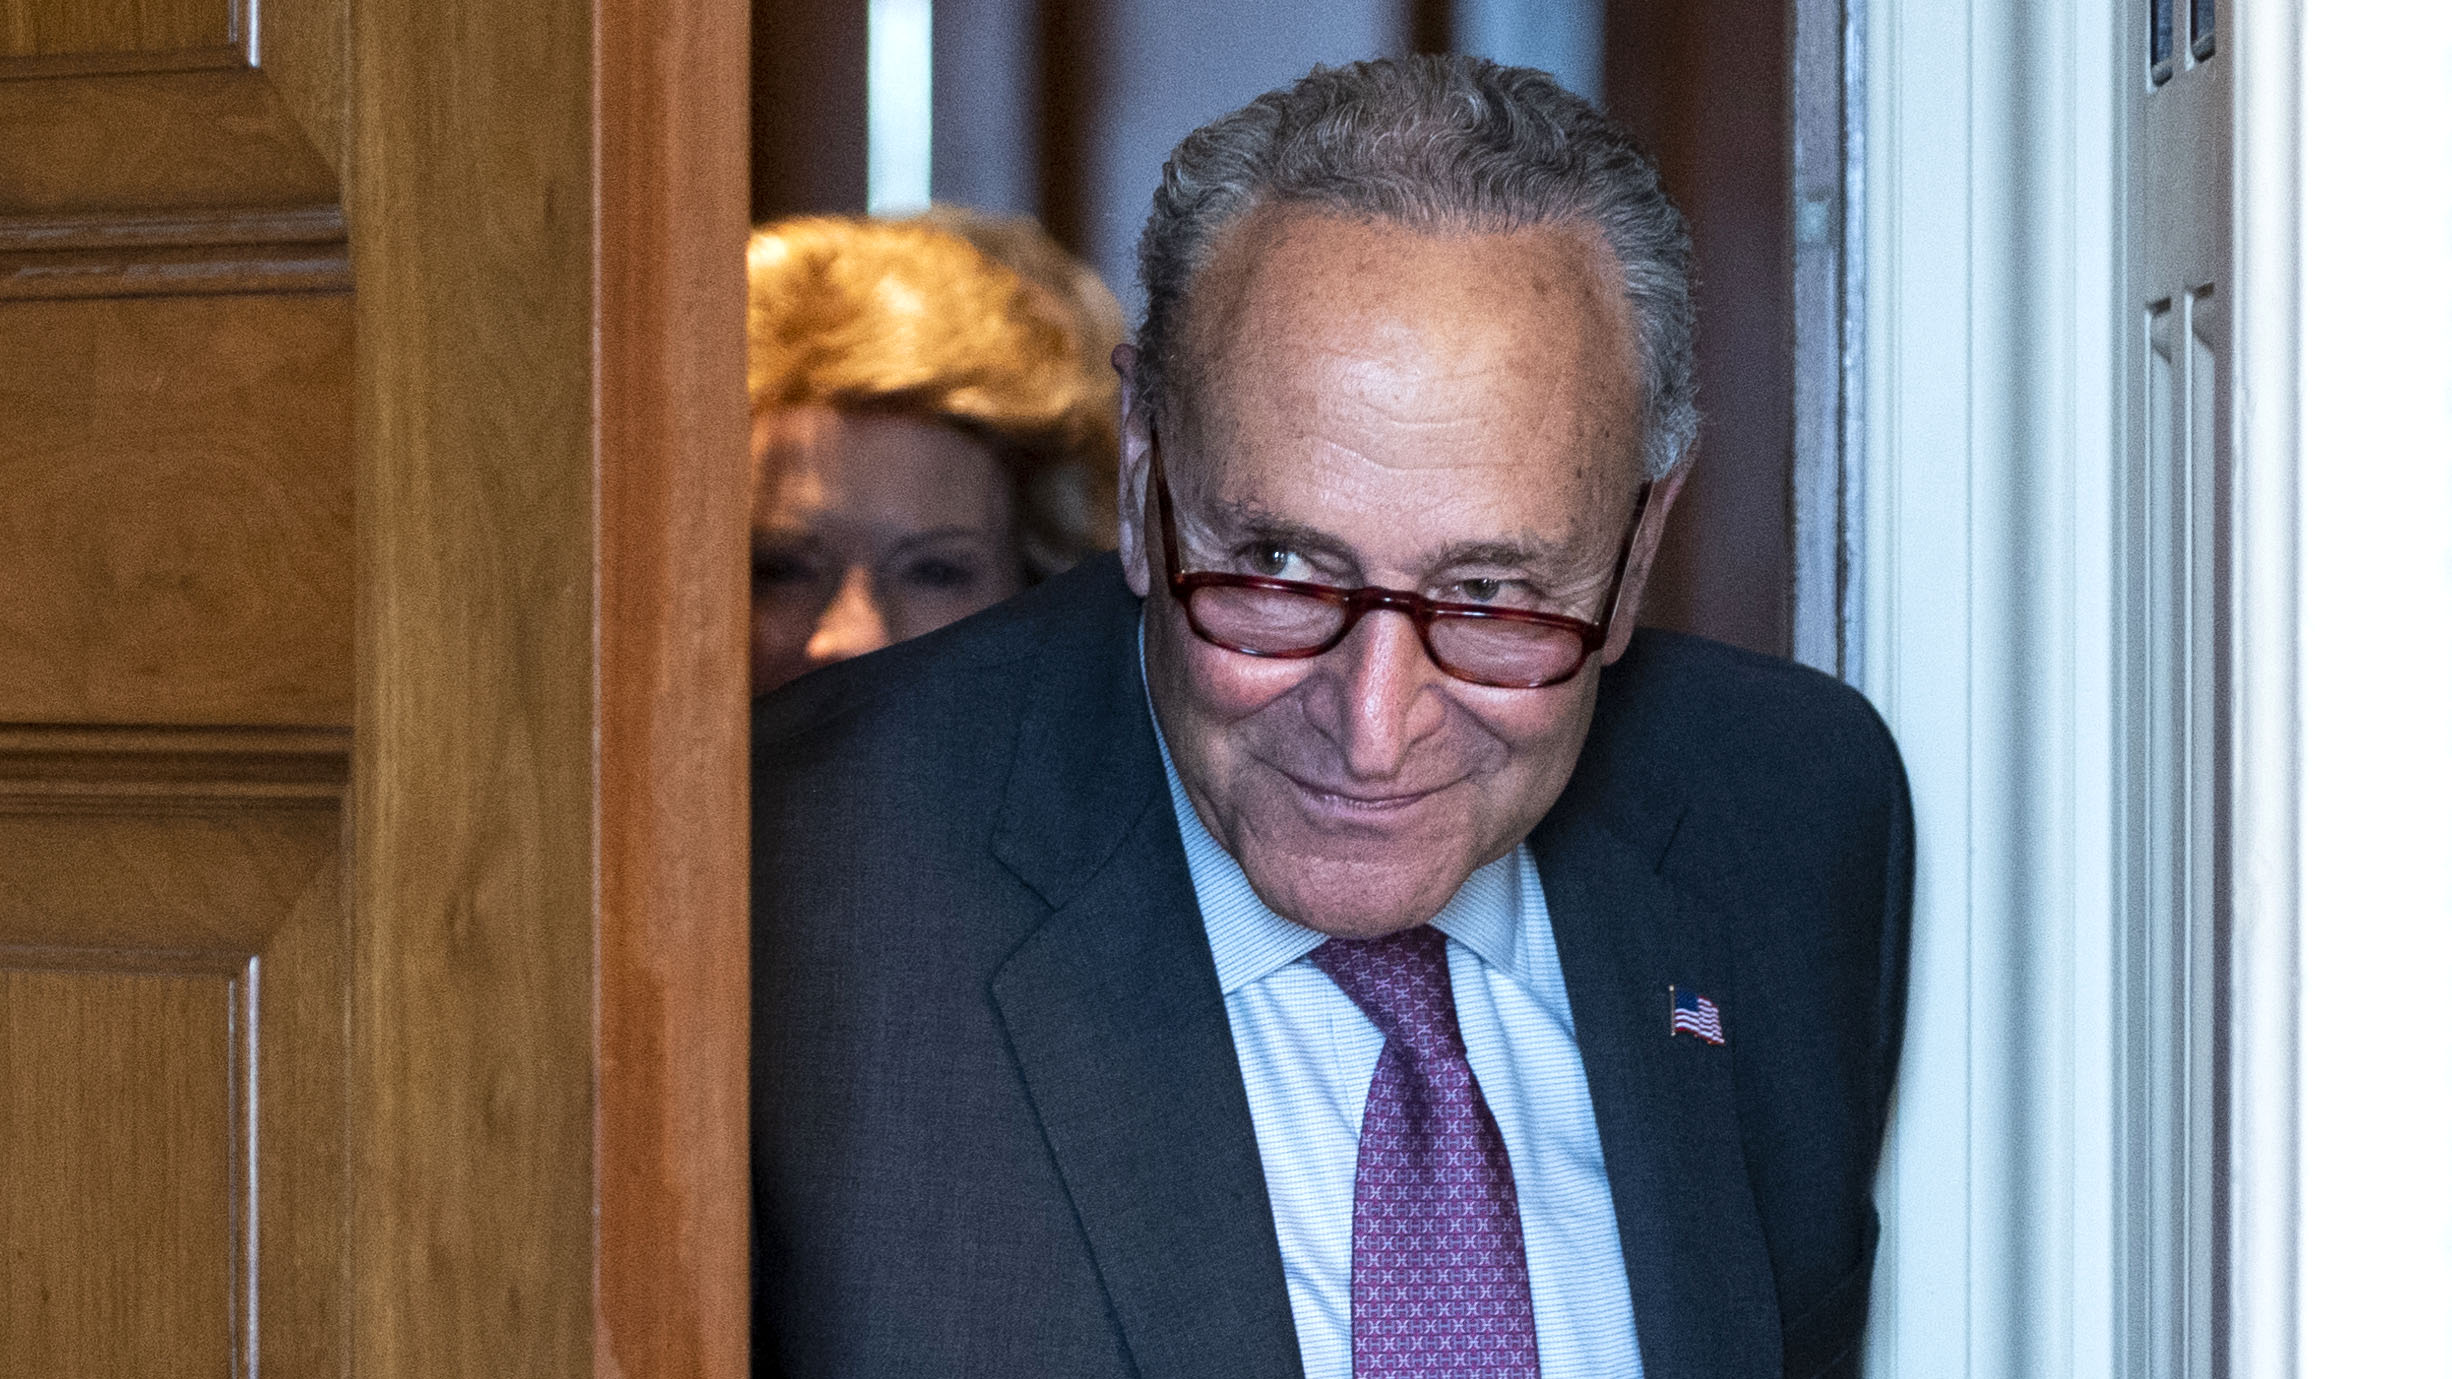 chuck-schumer:-‘democrats-will-hold-the-senate-and-maybe-even-pick-up-seats’-in-midterms